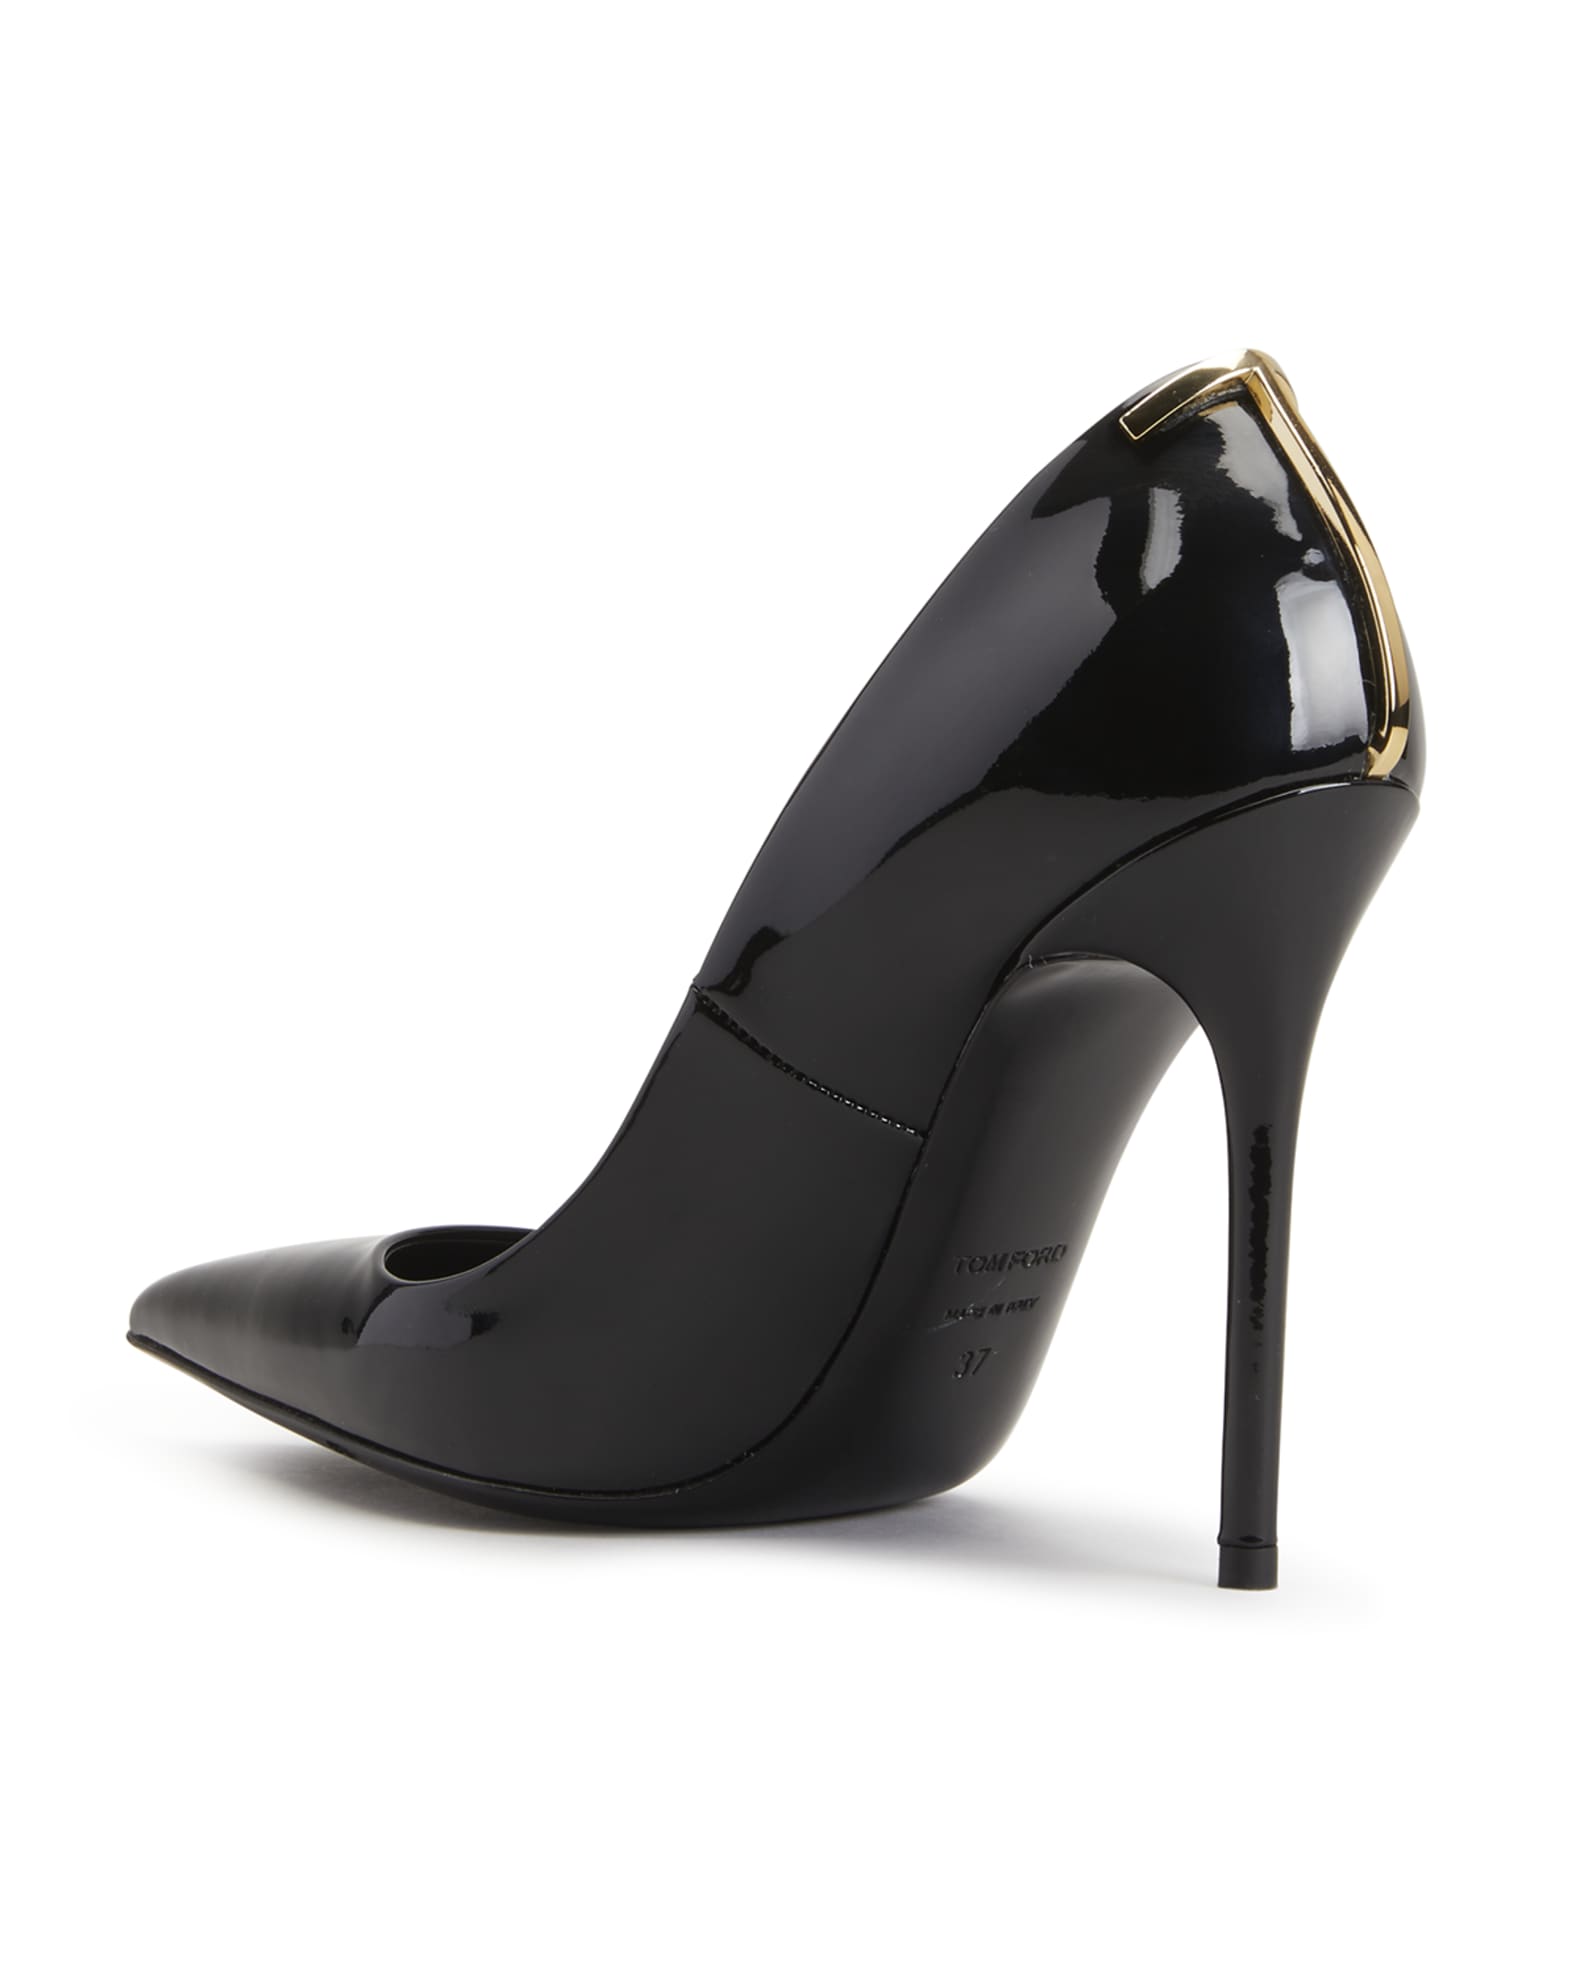 TOM FORD Iconic T Medallion Patent Pumps | Neiman Marcus